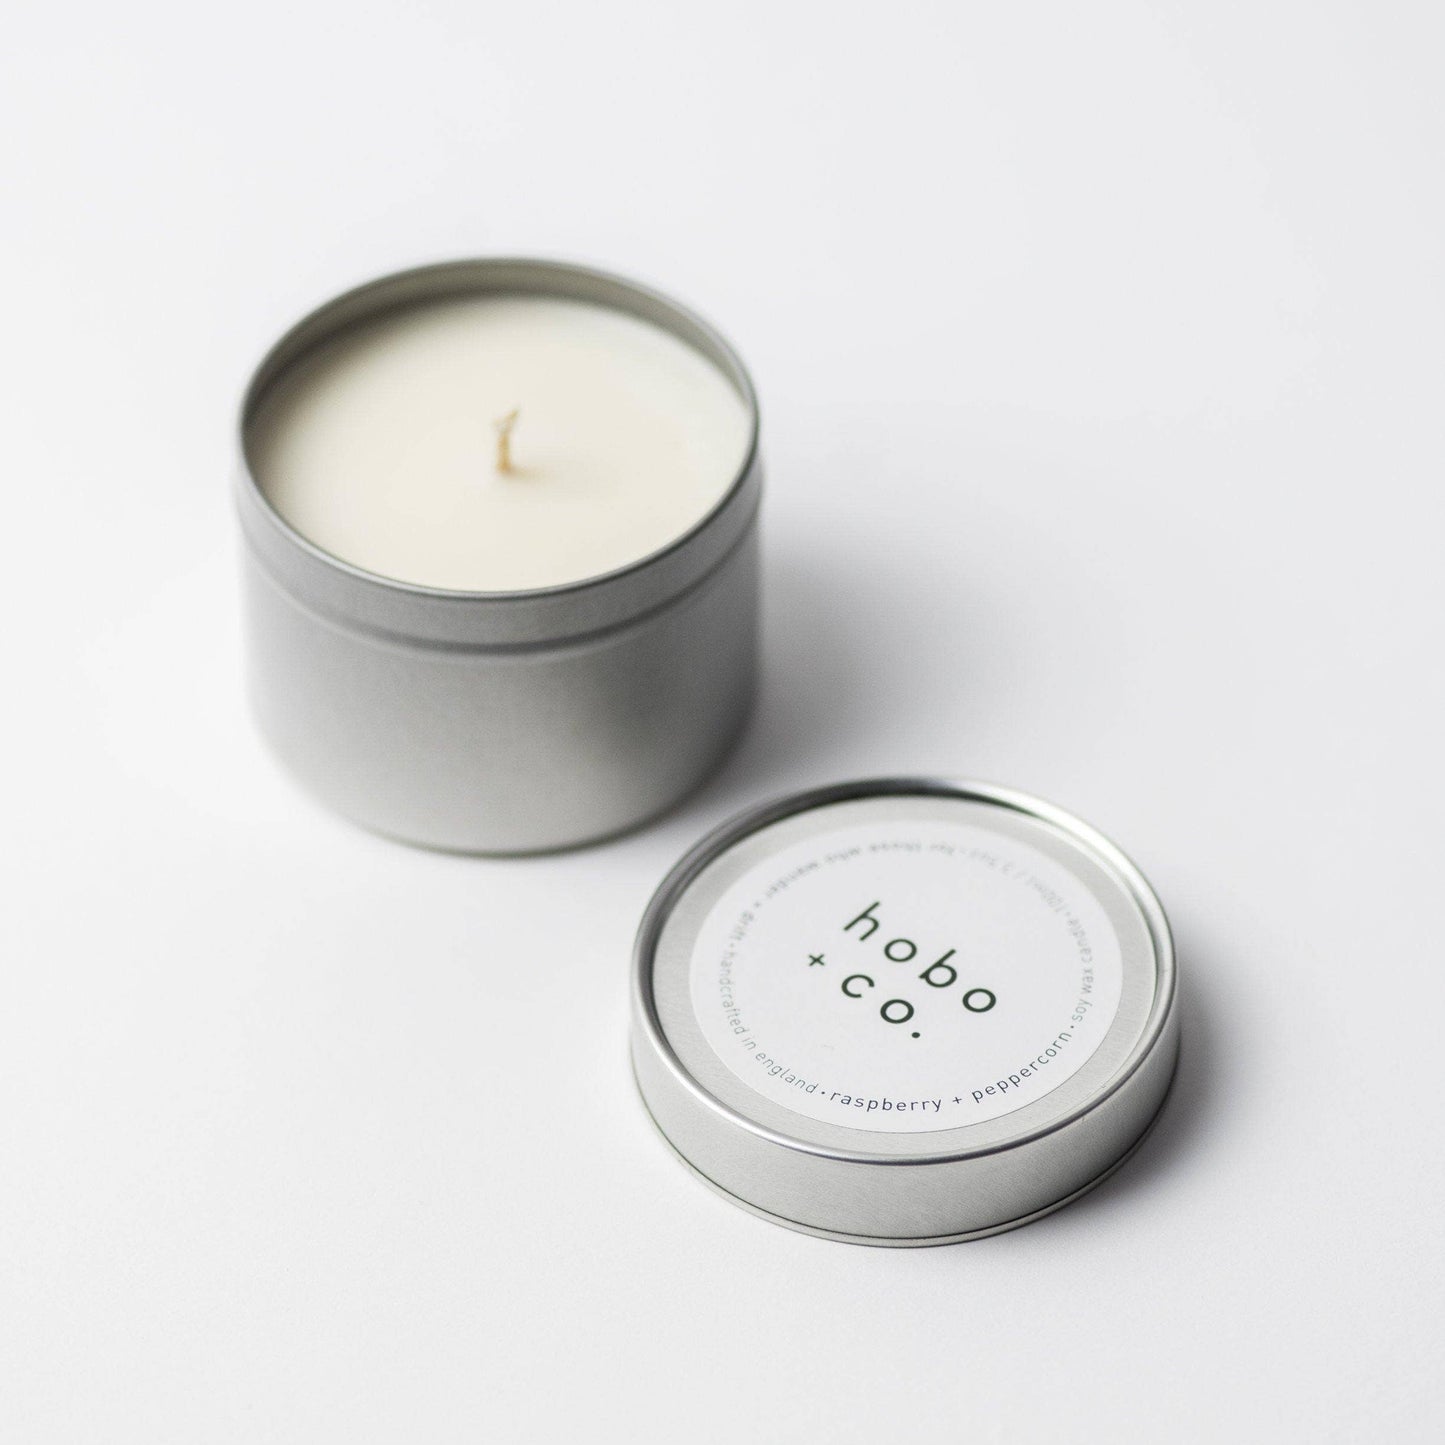 Hobo+Co Raspberry & Peppercorn Travel Tin Soy Wax Candle at Joetie Home Fragrance. Luxury Handmade Apothecary Soy Candles